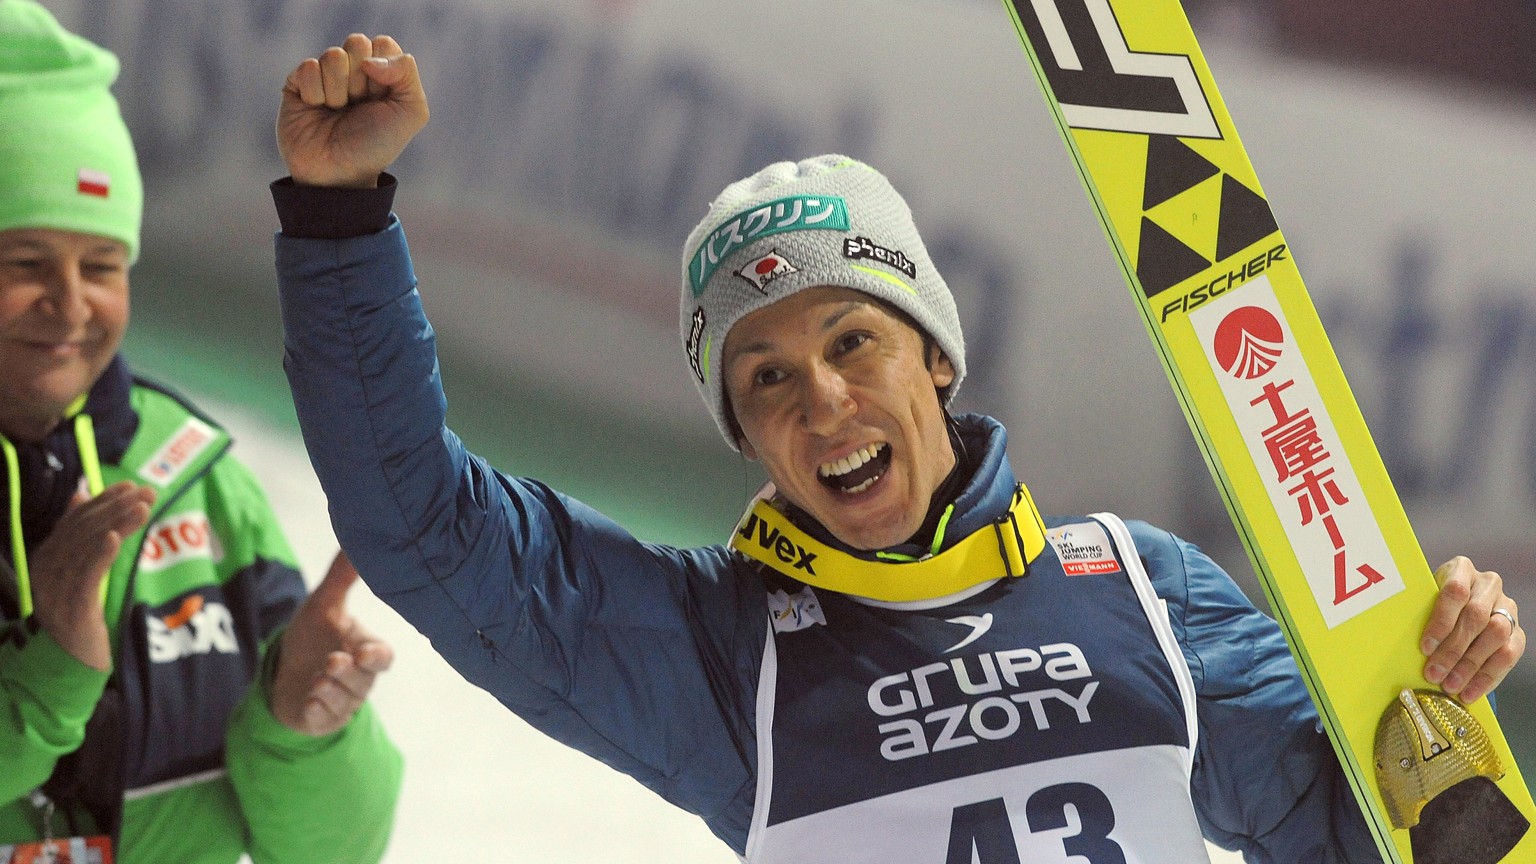 Japan&#039;s Noriaki Kasai celebrates his third place in the 34th World Cup Ski Jumping competition, in Wisla, Poland, Friday, March 4, 2016. (AP Photo/Alik Keplicz)